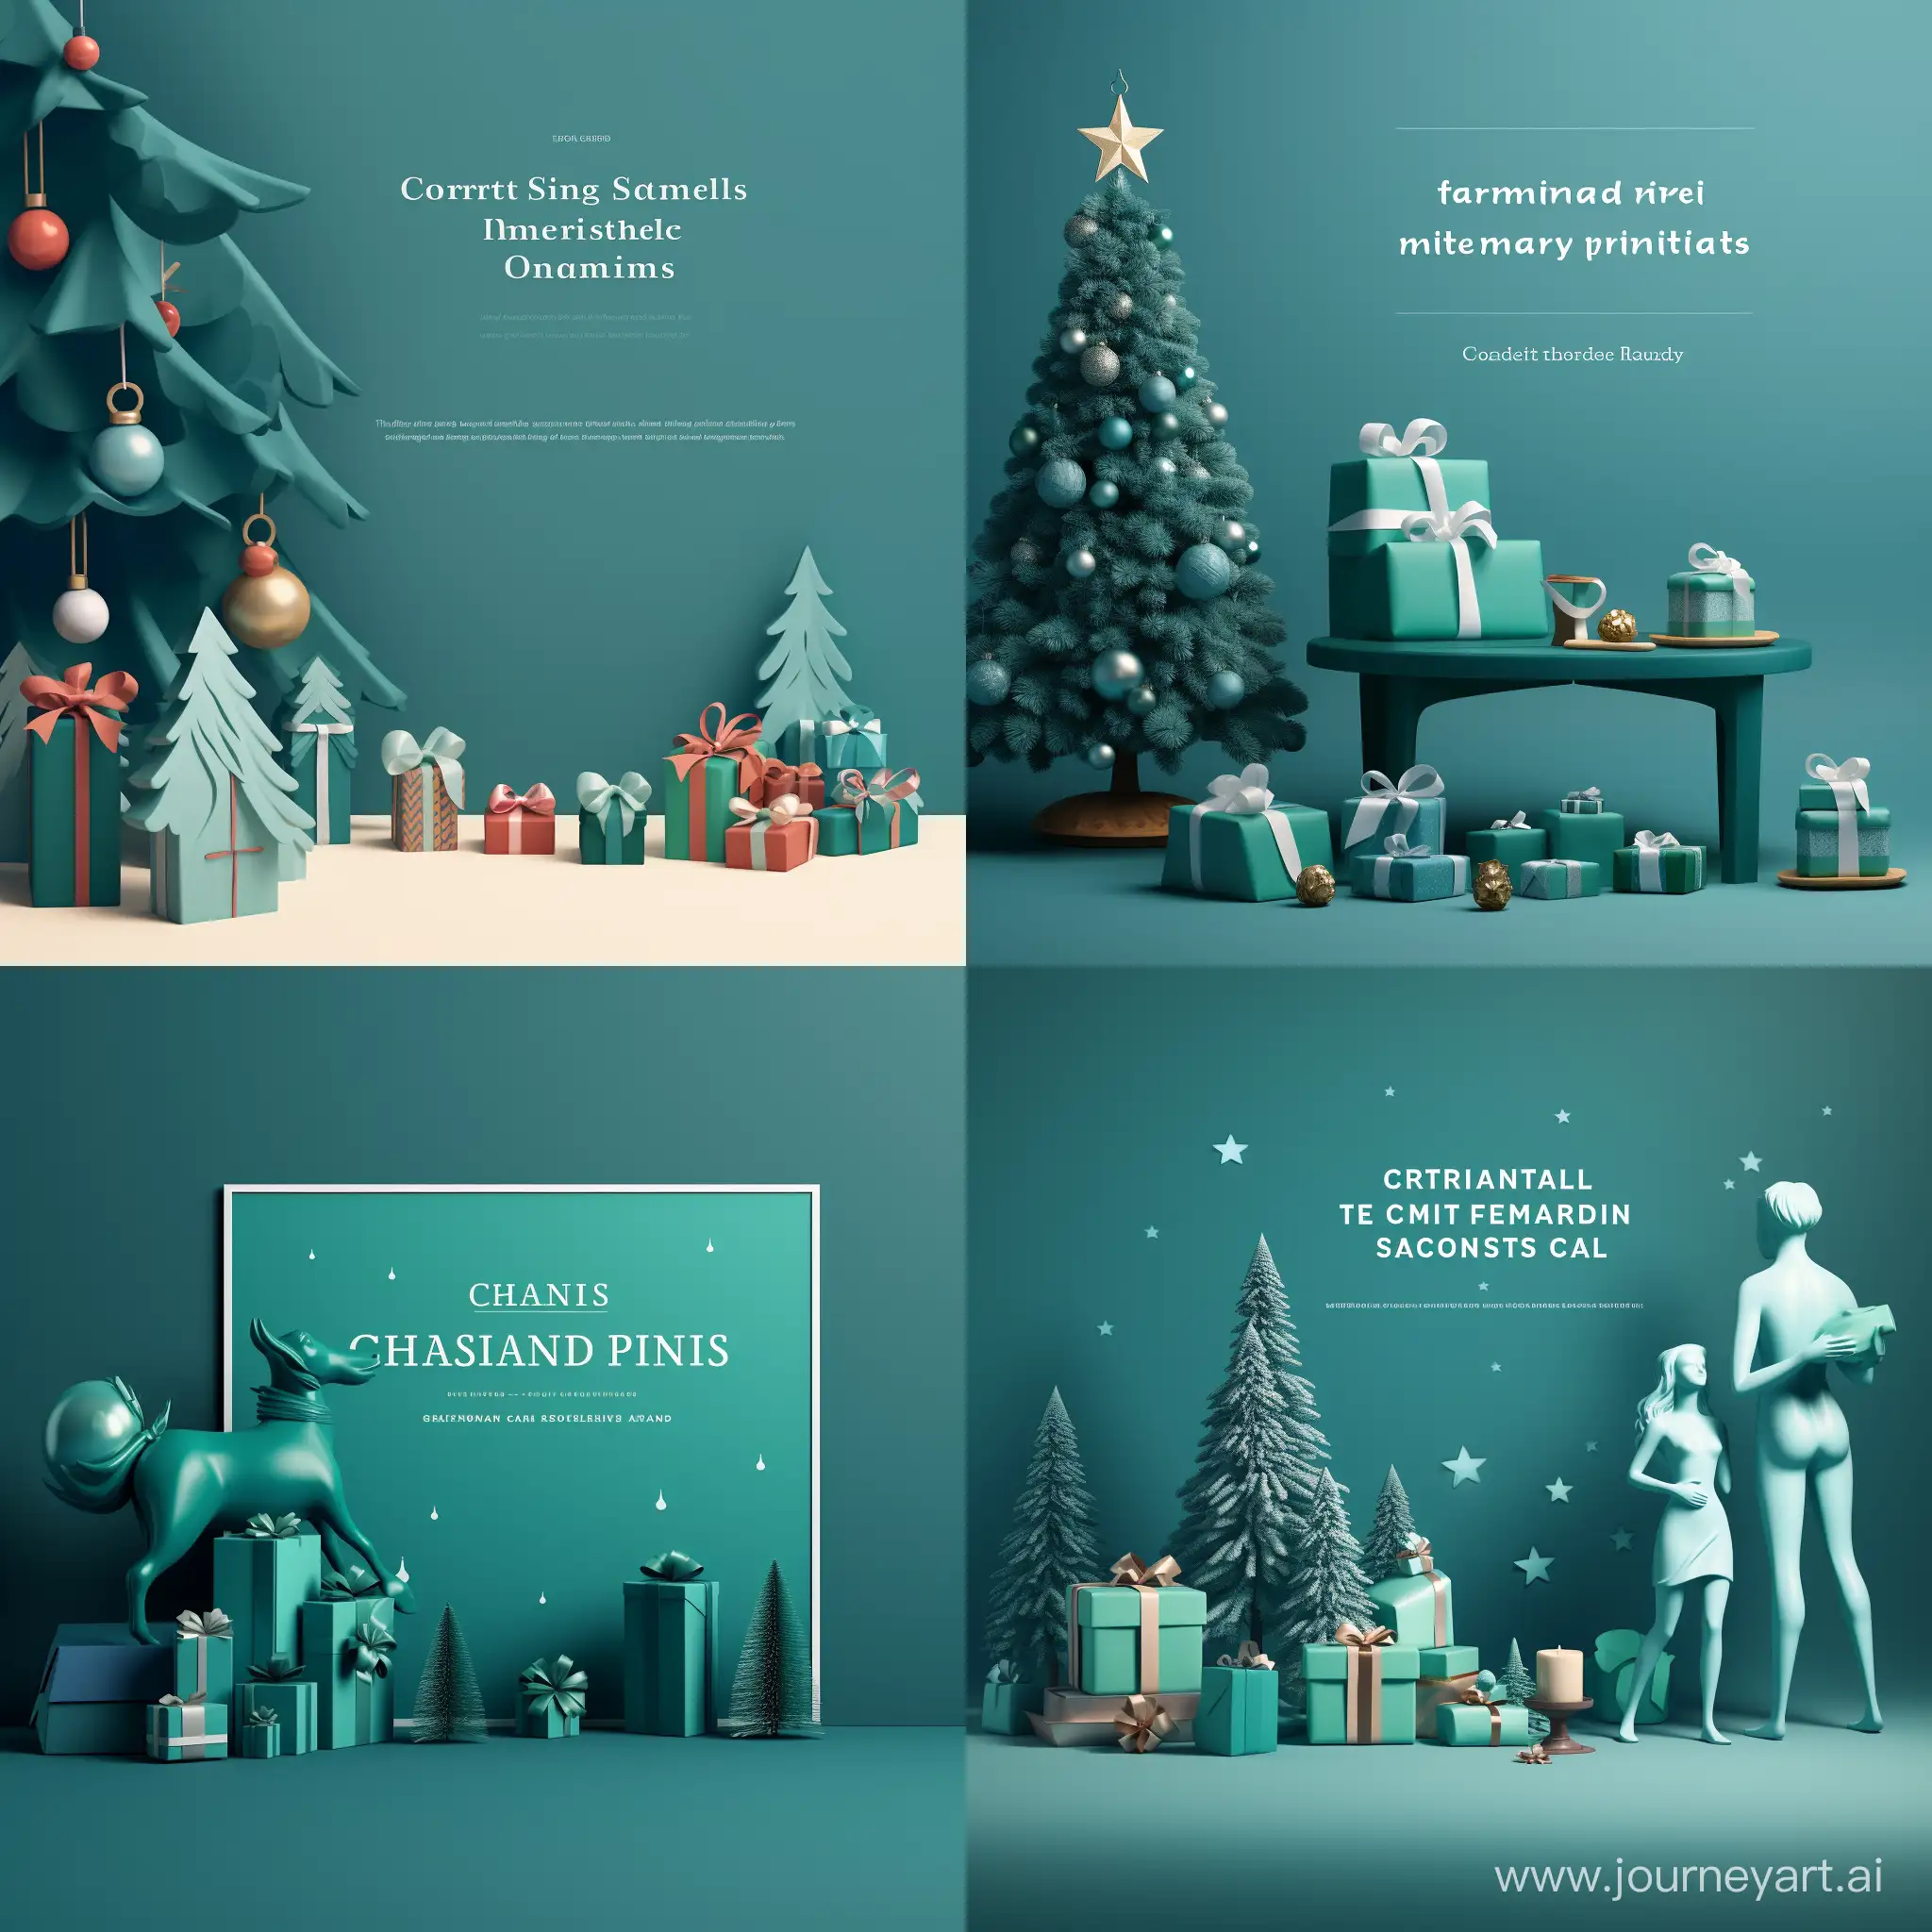 Christmas-3D-Printing-Promotion-Festive-Figures-and-Printer-in-BlueGreen-Tones